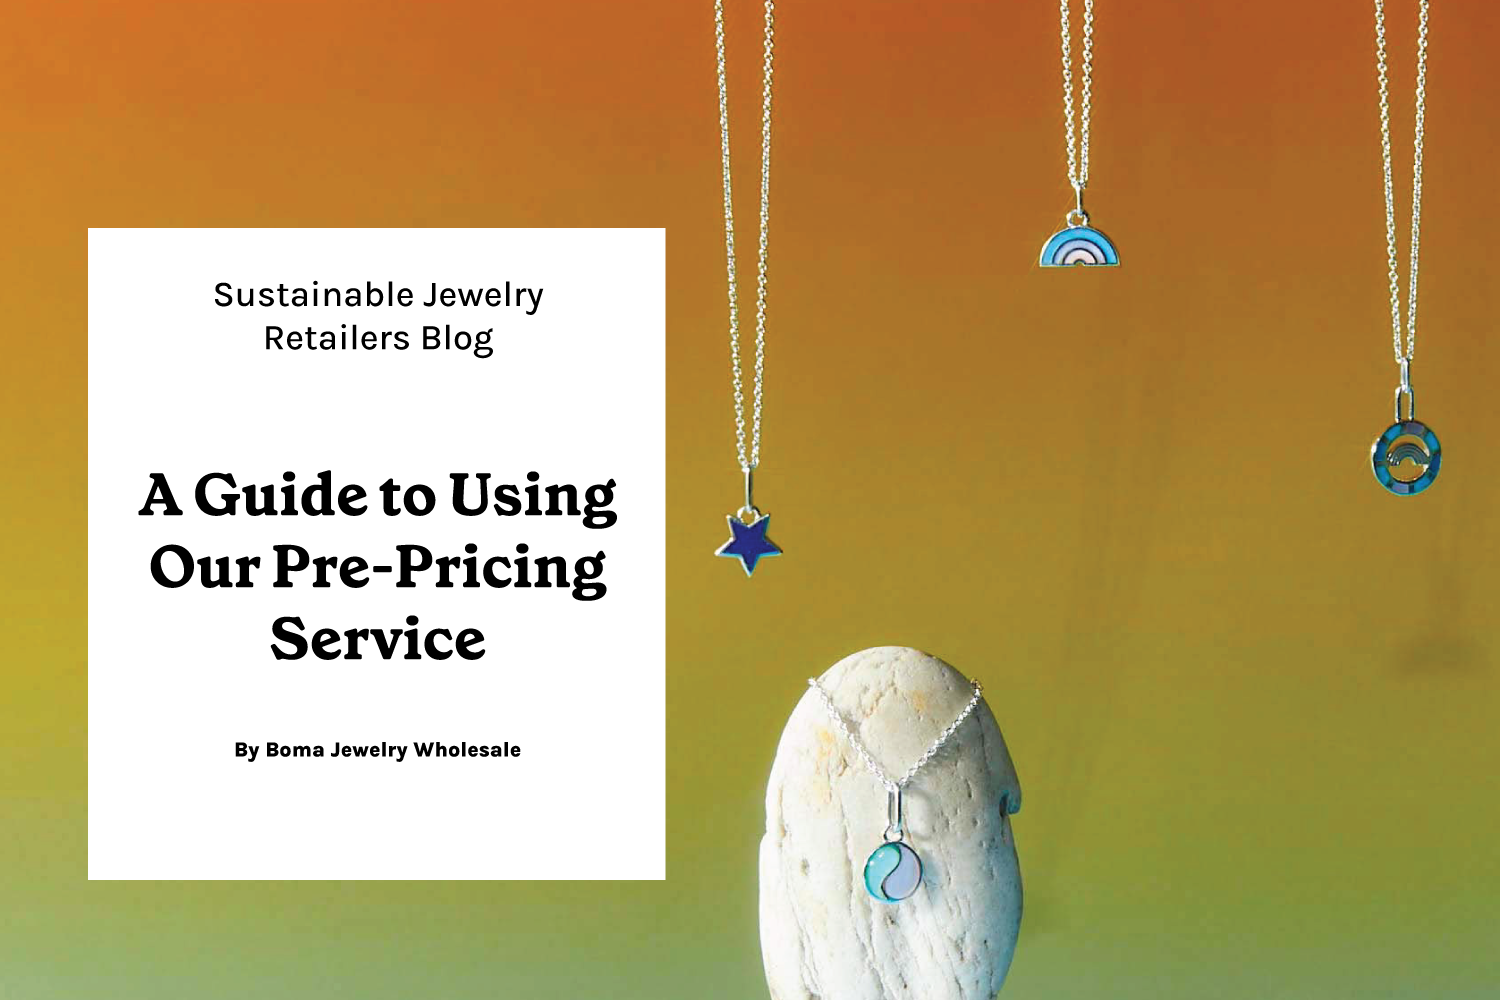 Boma Jewelry Wholesale Blog Guide to Pre-pricing and Markup